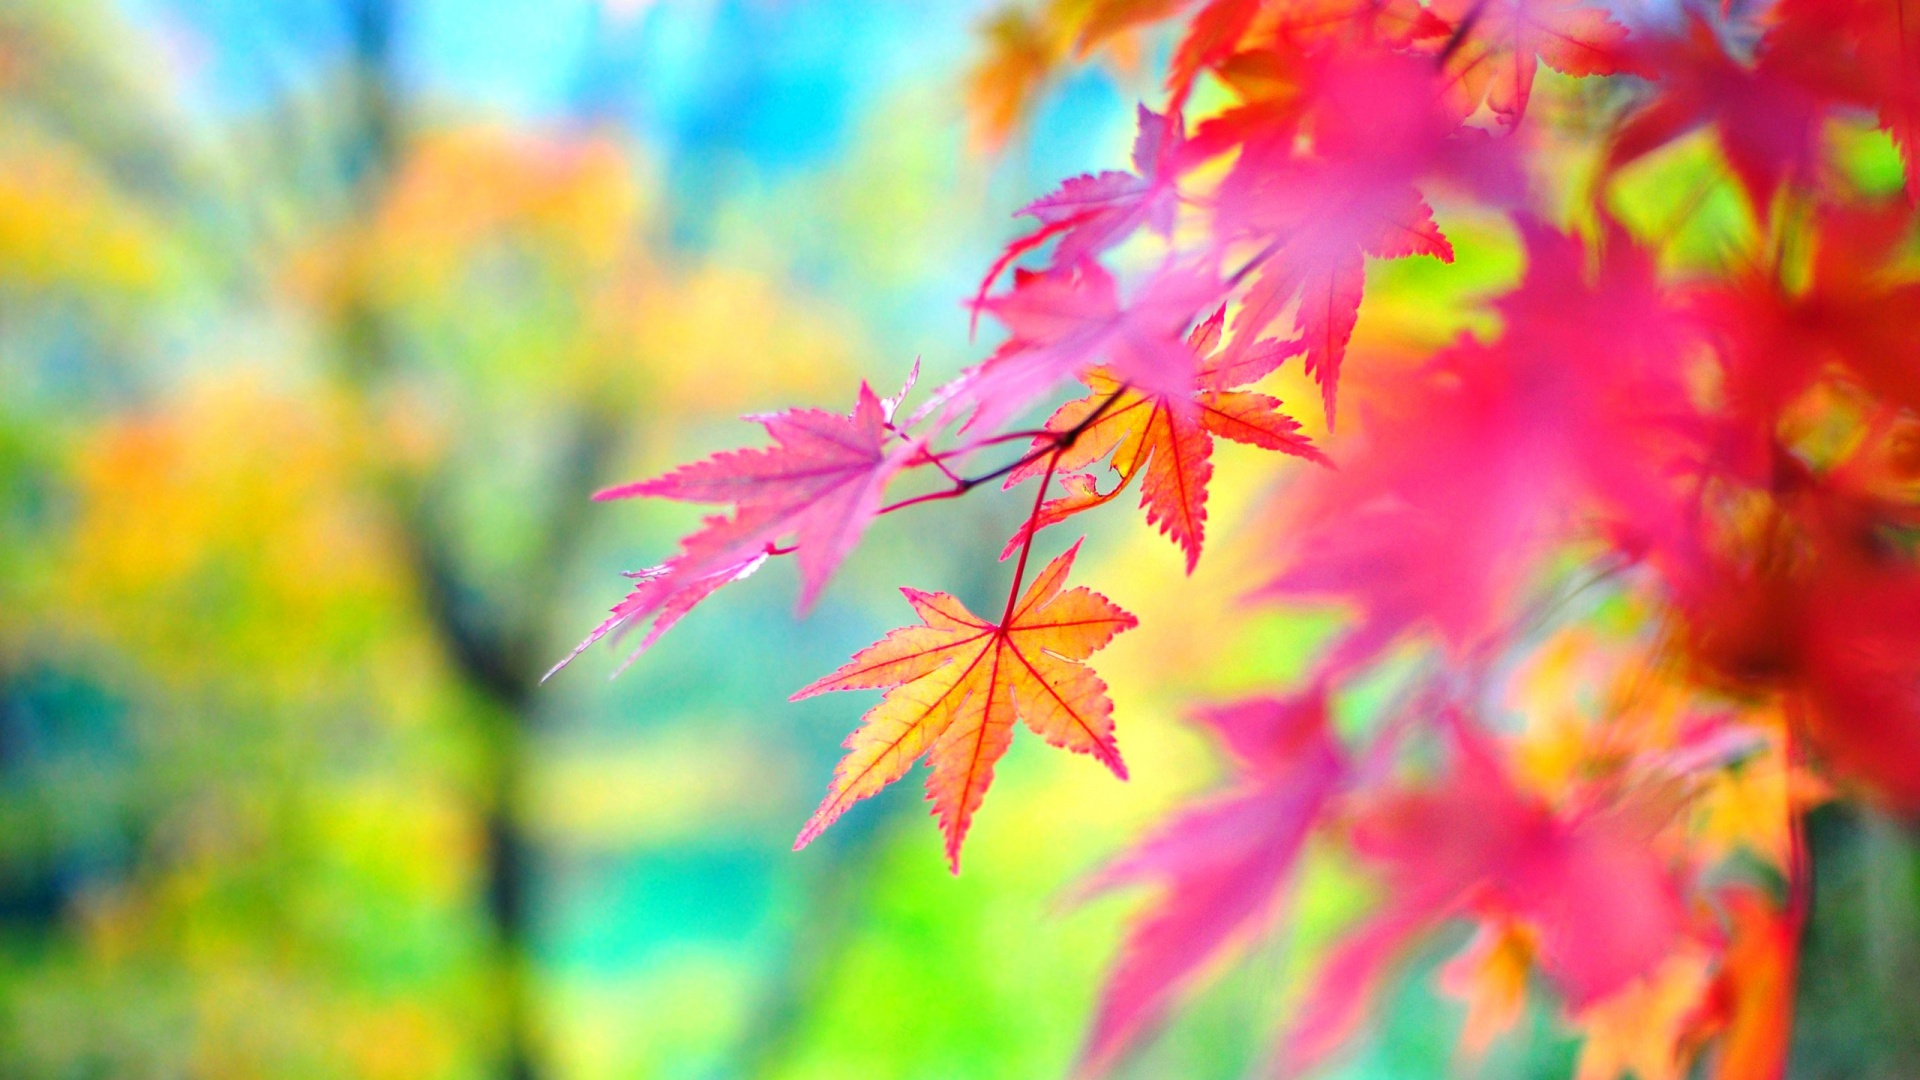 colorful wallpaper hd,leaf,nature,tree,maple leaf,green